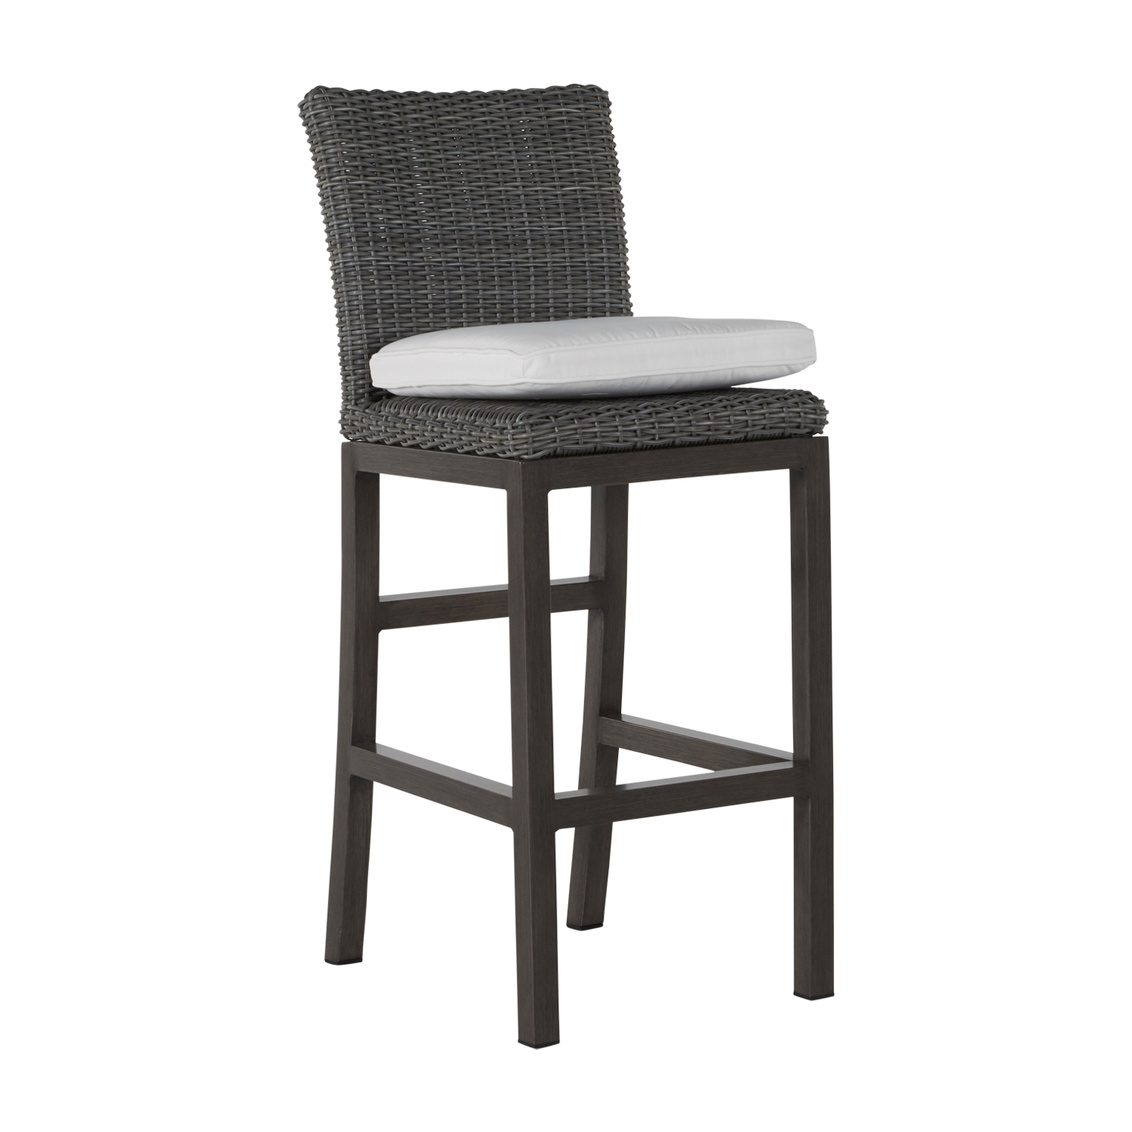 30.5 inch rustic bar stool in slate grey – frame only product image